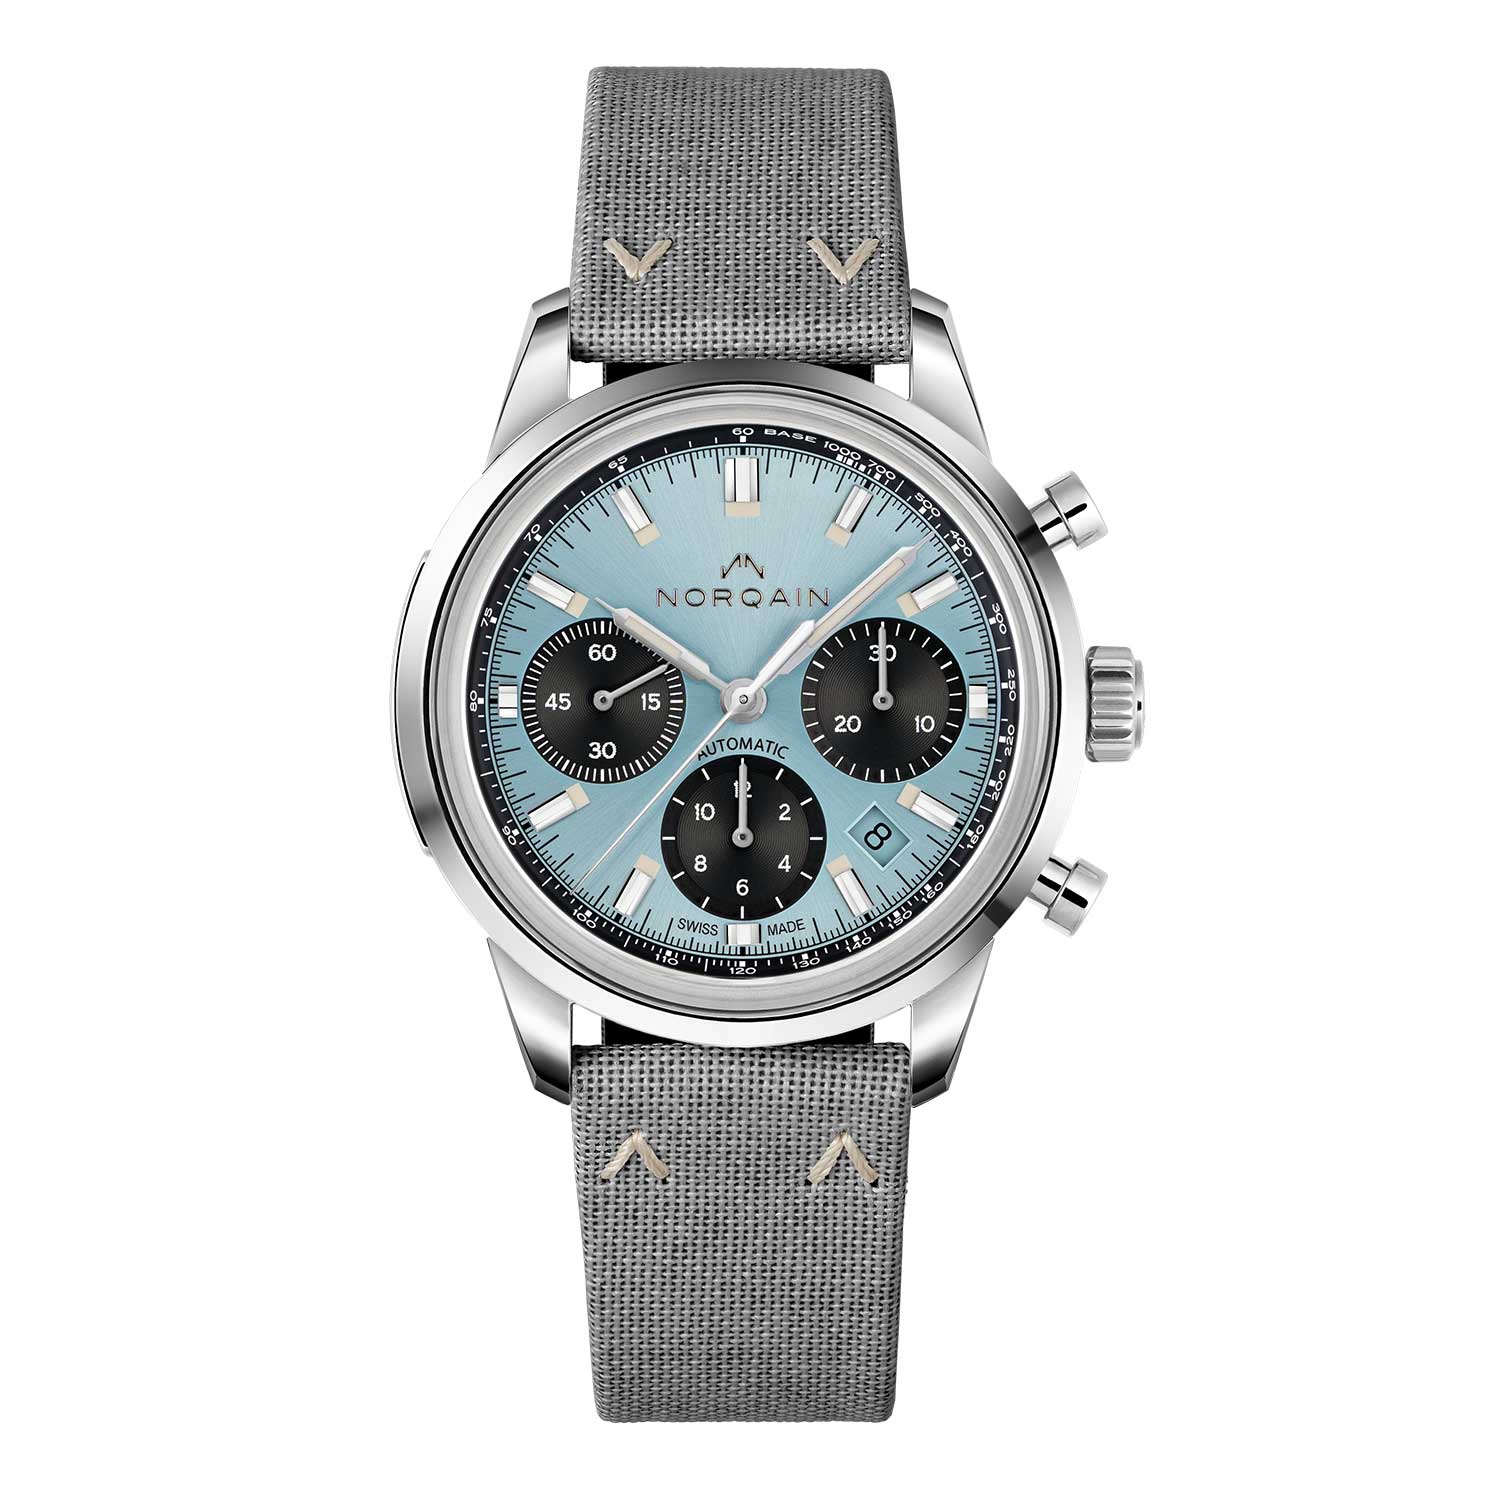 Norqain Freedom 60 Chrono Ice Blue Limited Edition with Grey Nortide strap